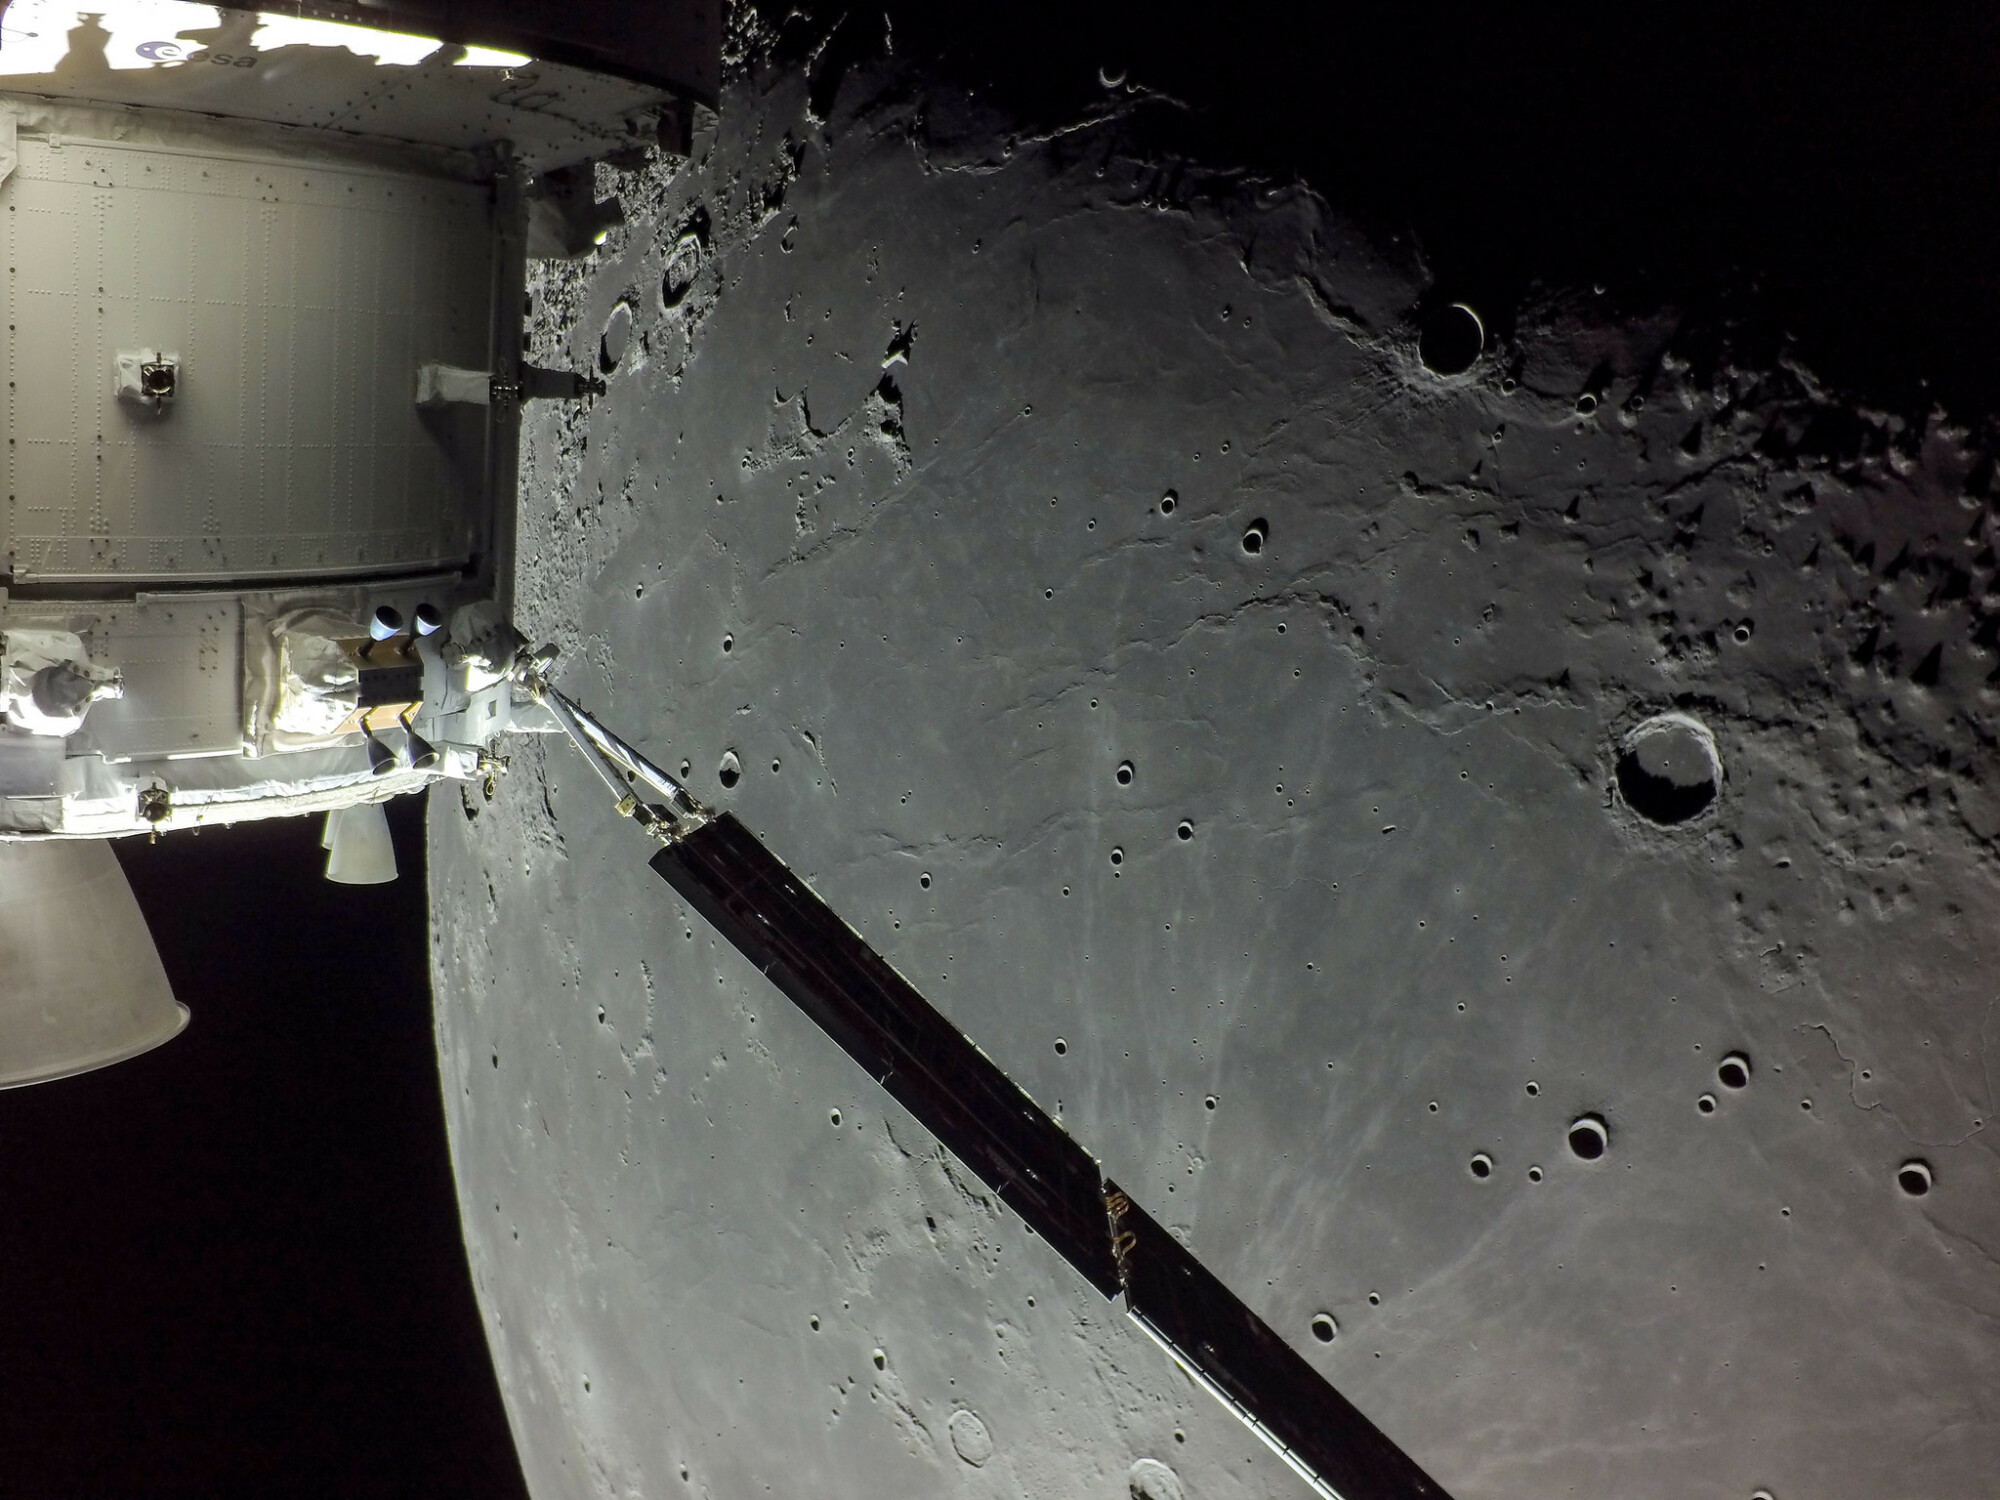 The Orion spacecraft's solar array in front of the moon